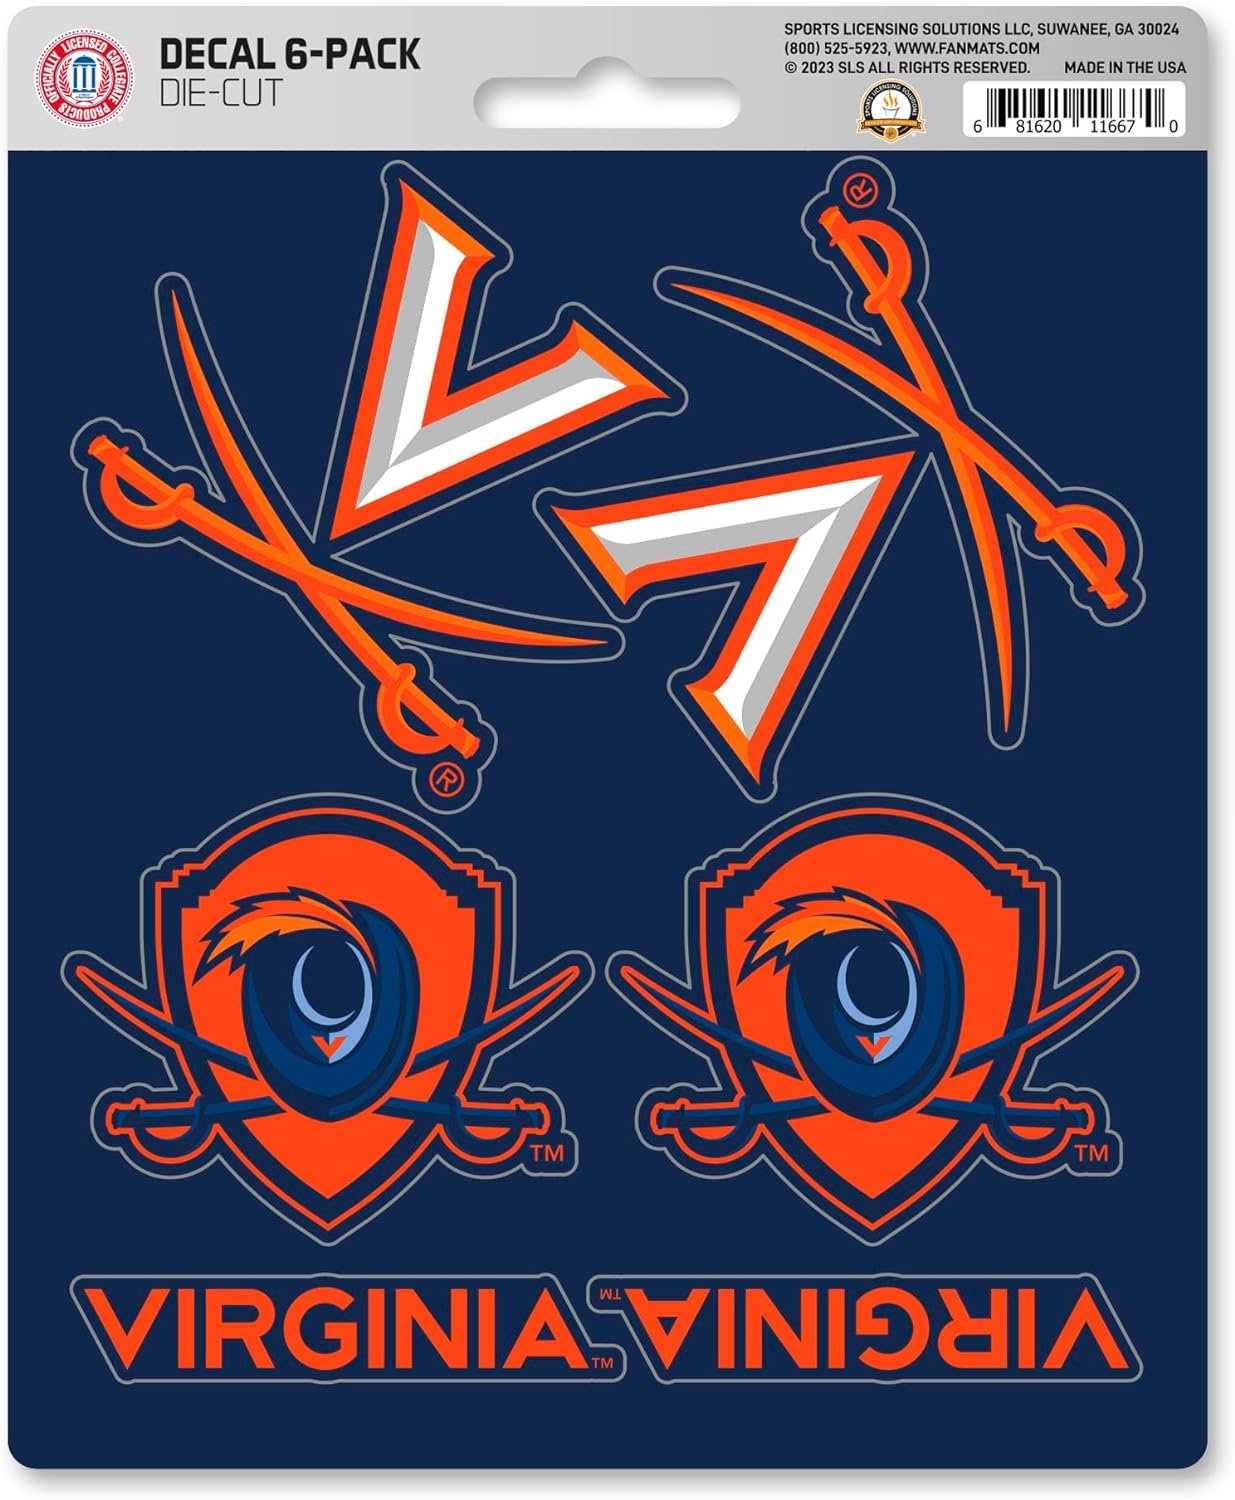 University of Virginia Cavaliers 6-Piece Decal Sticker Set, 5x6 Inch Sheet, Gift for football fans for any hard surfaces around home, automotive, personal items